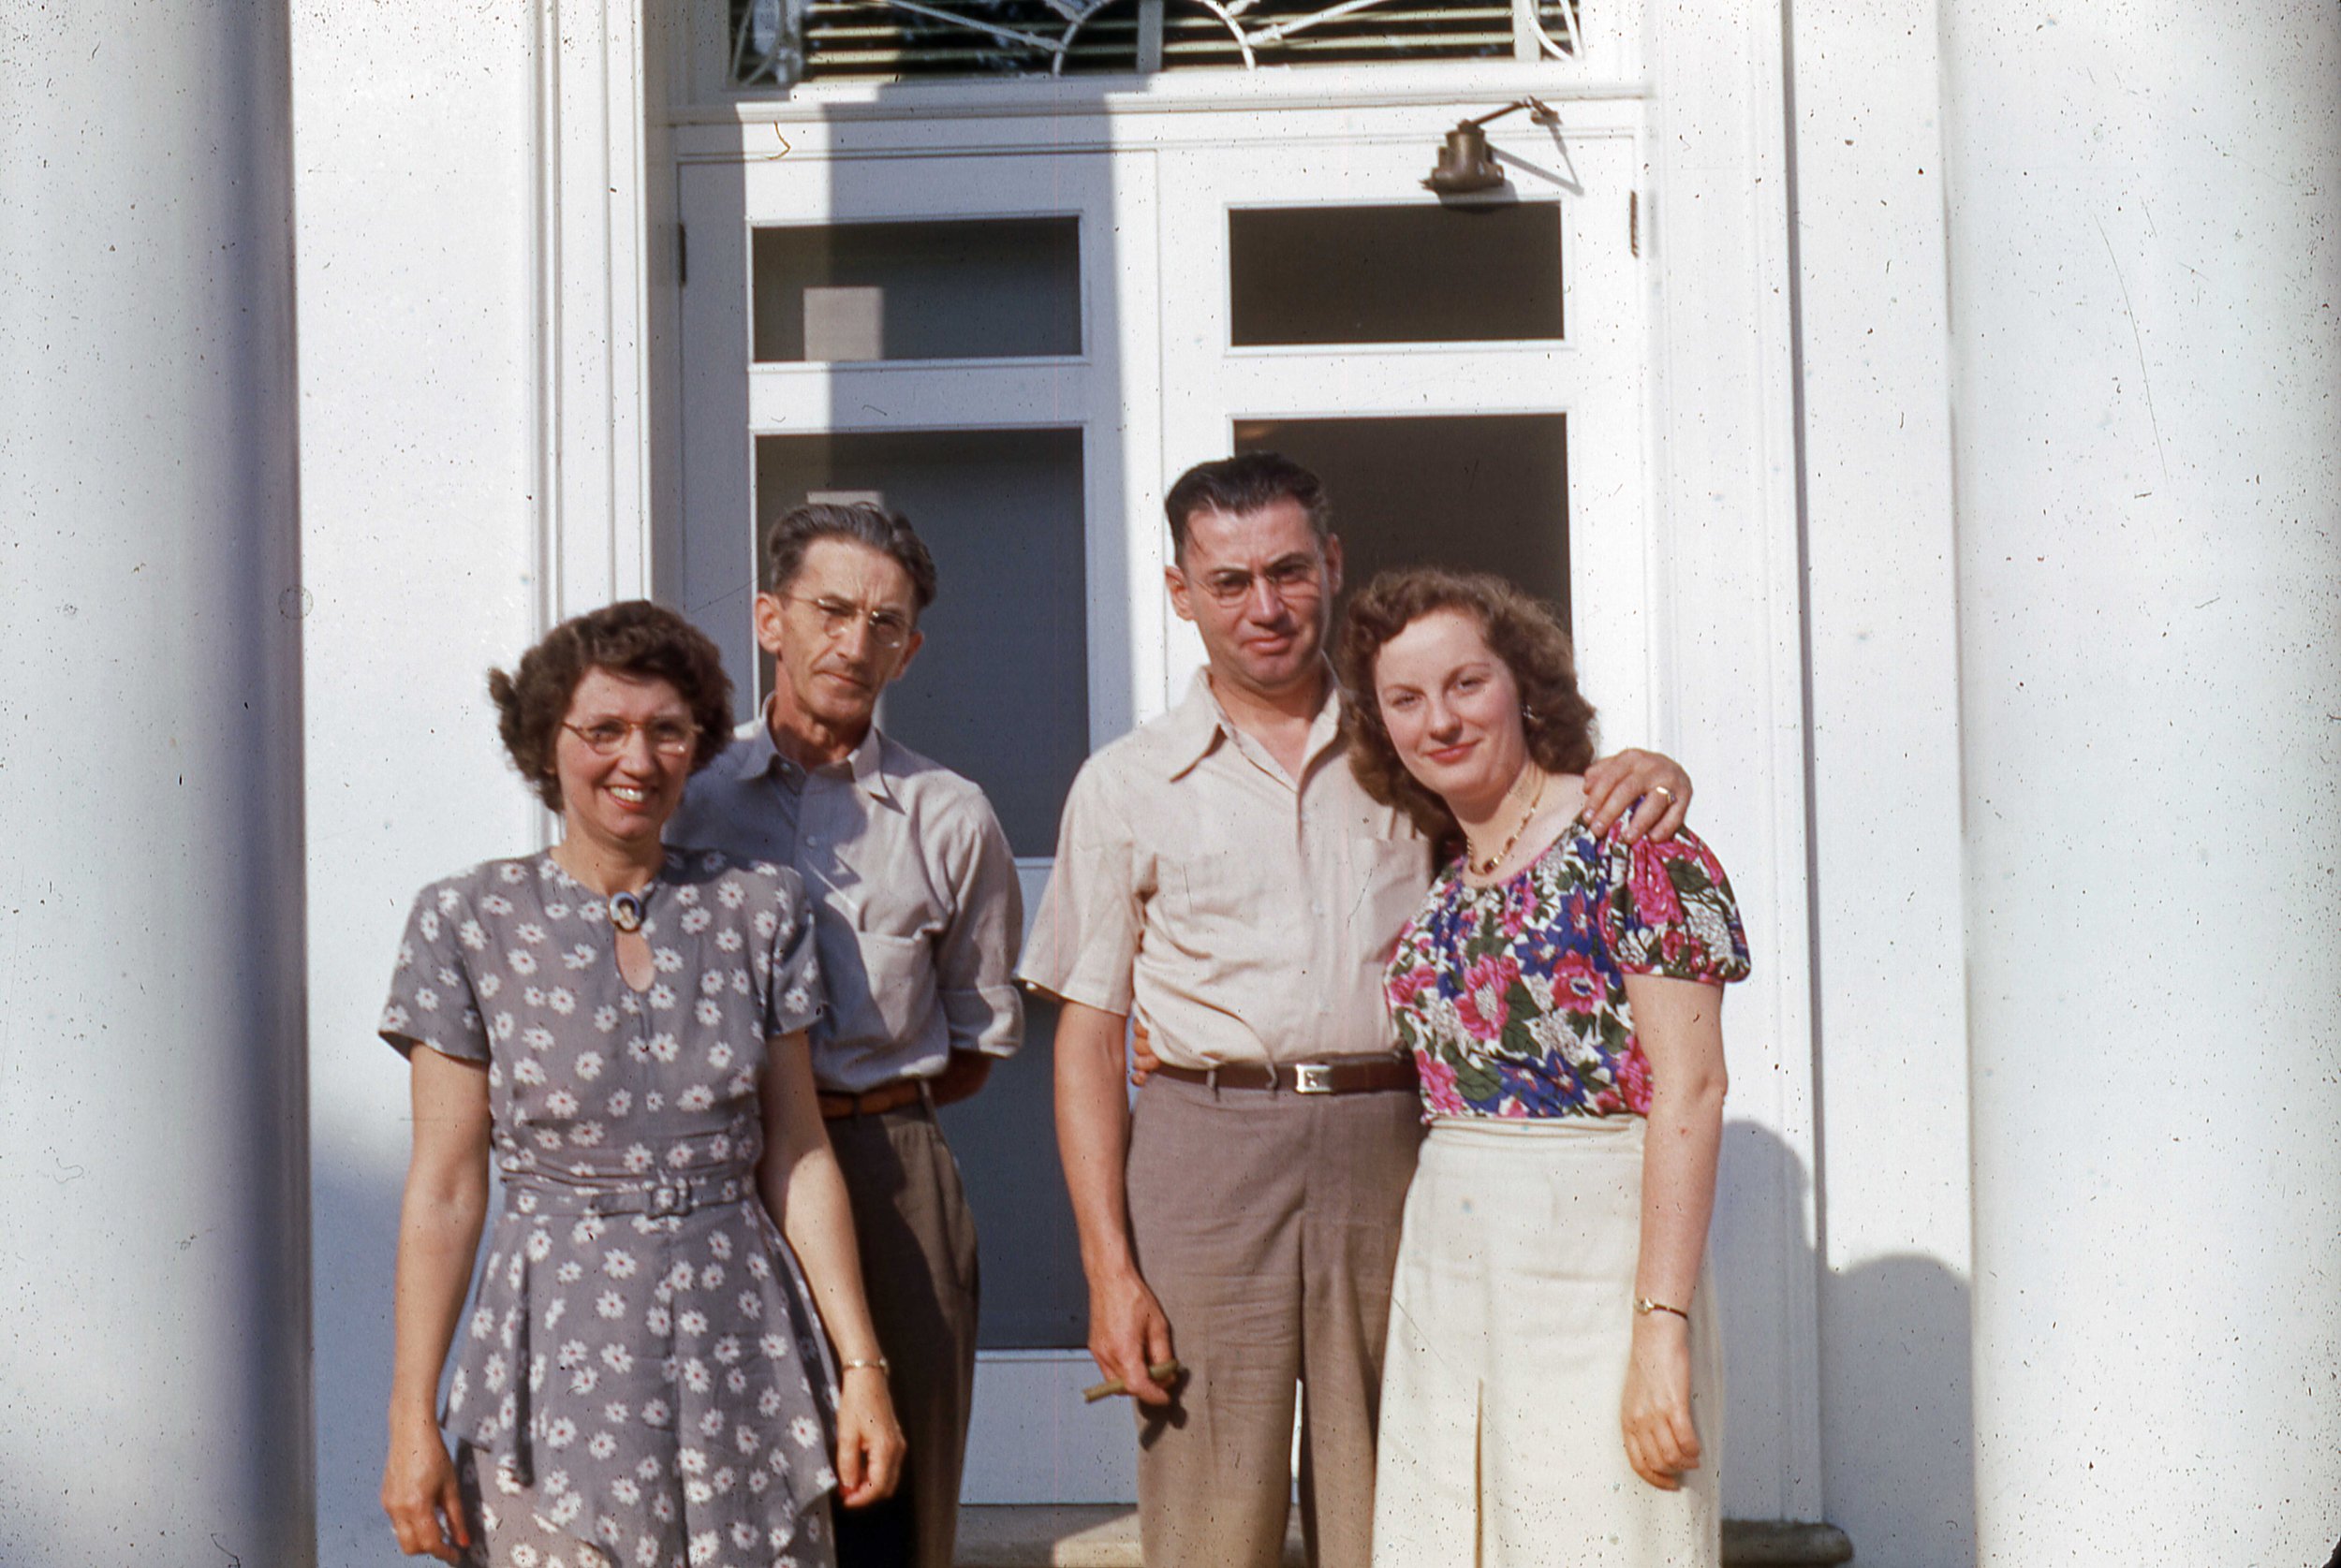 Frank and Paul with their wives c49.jpg